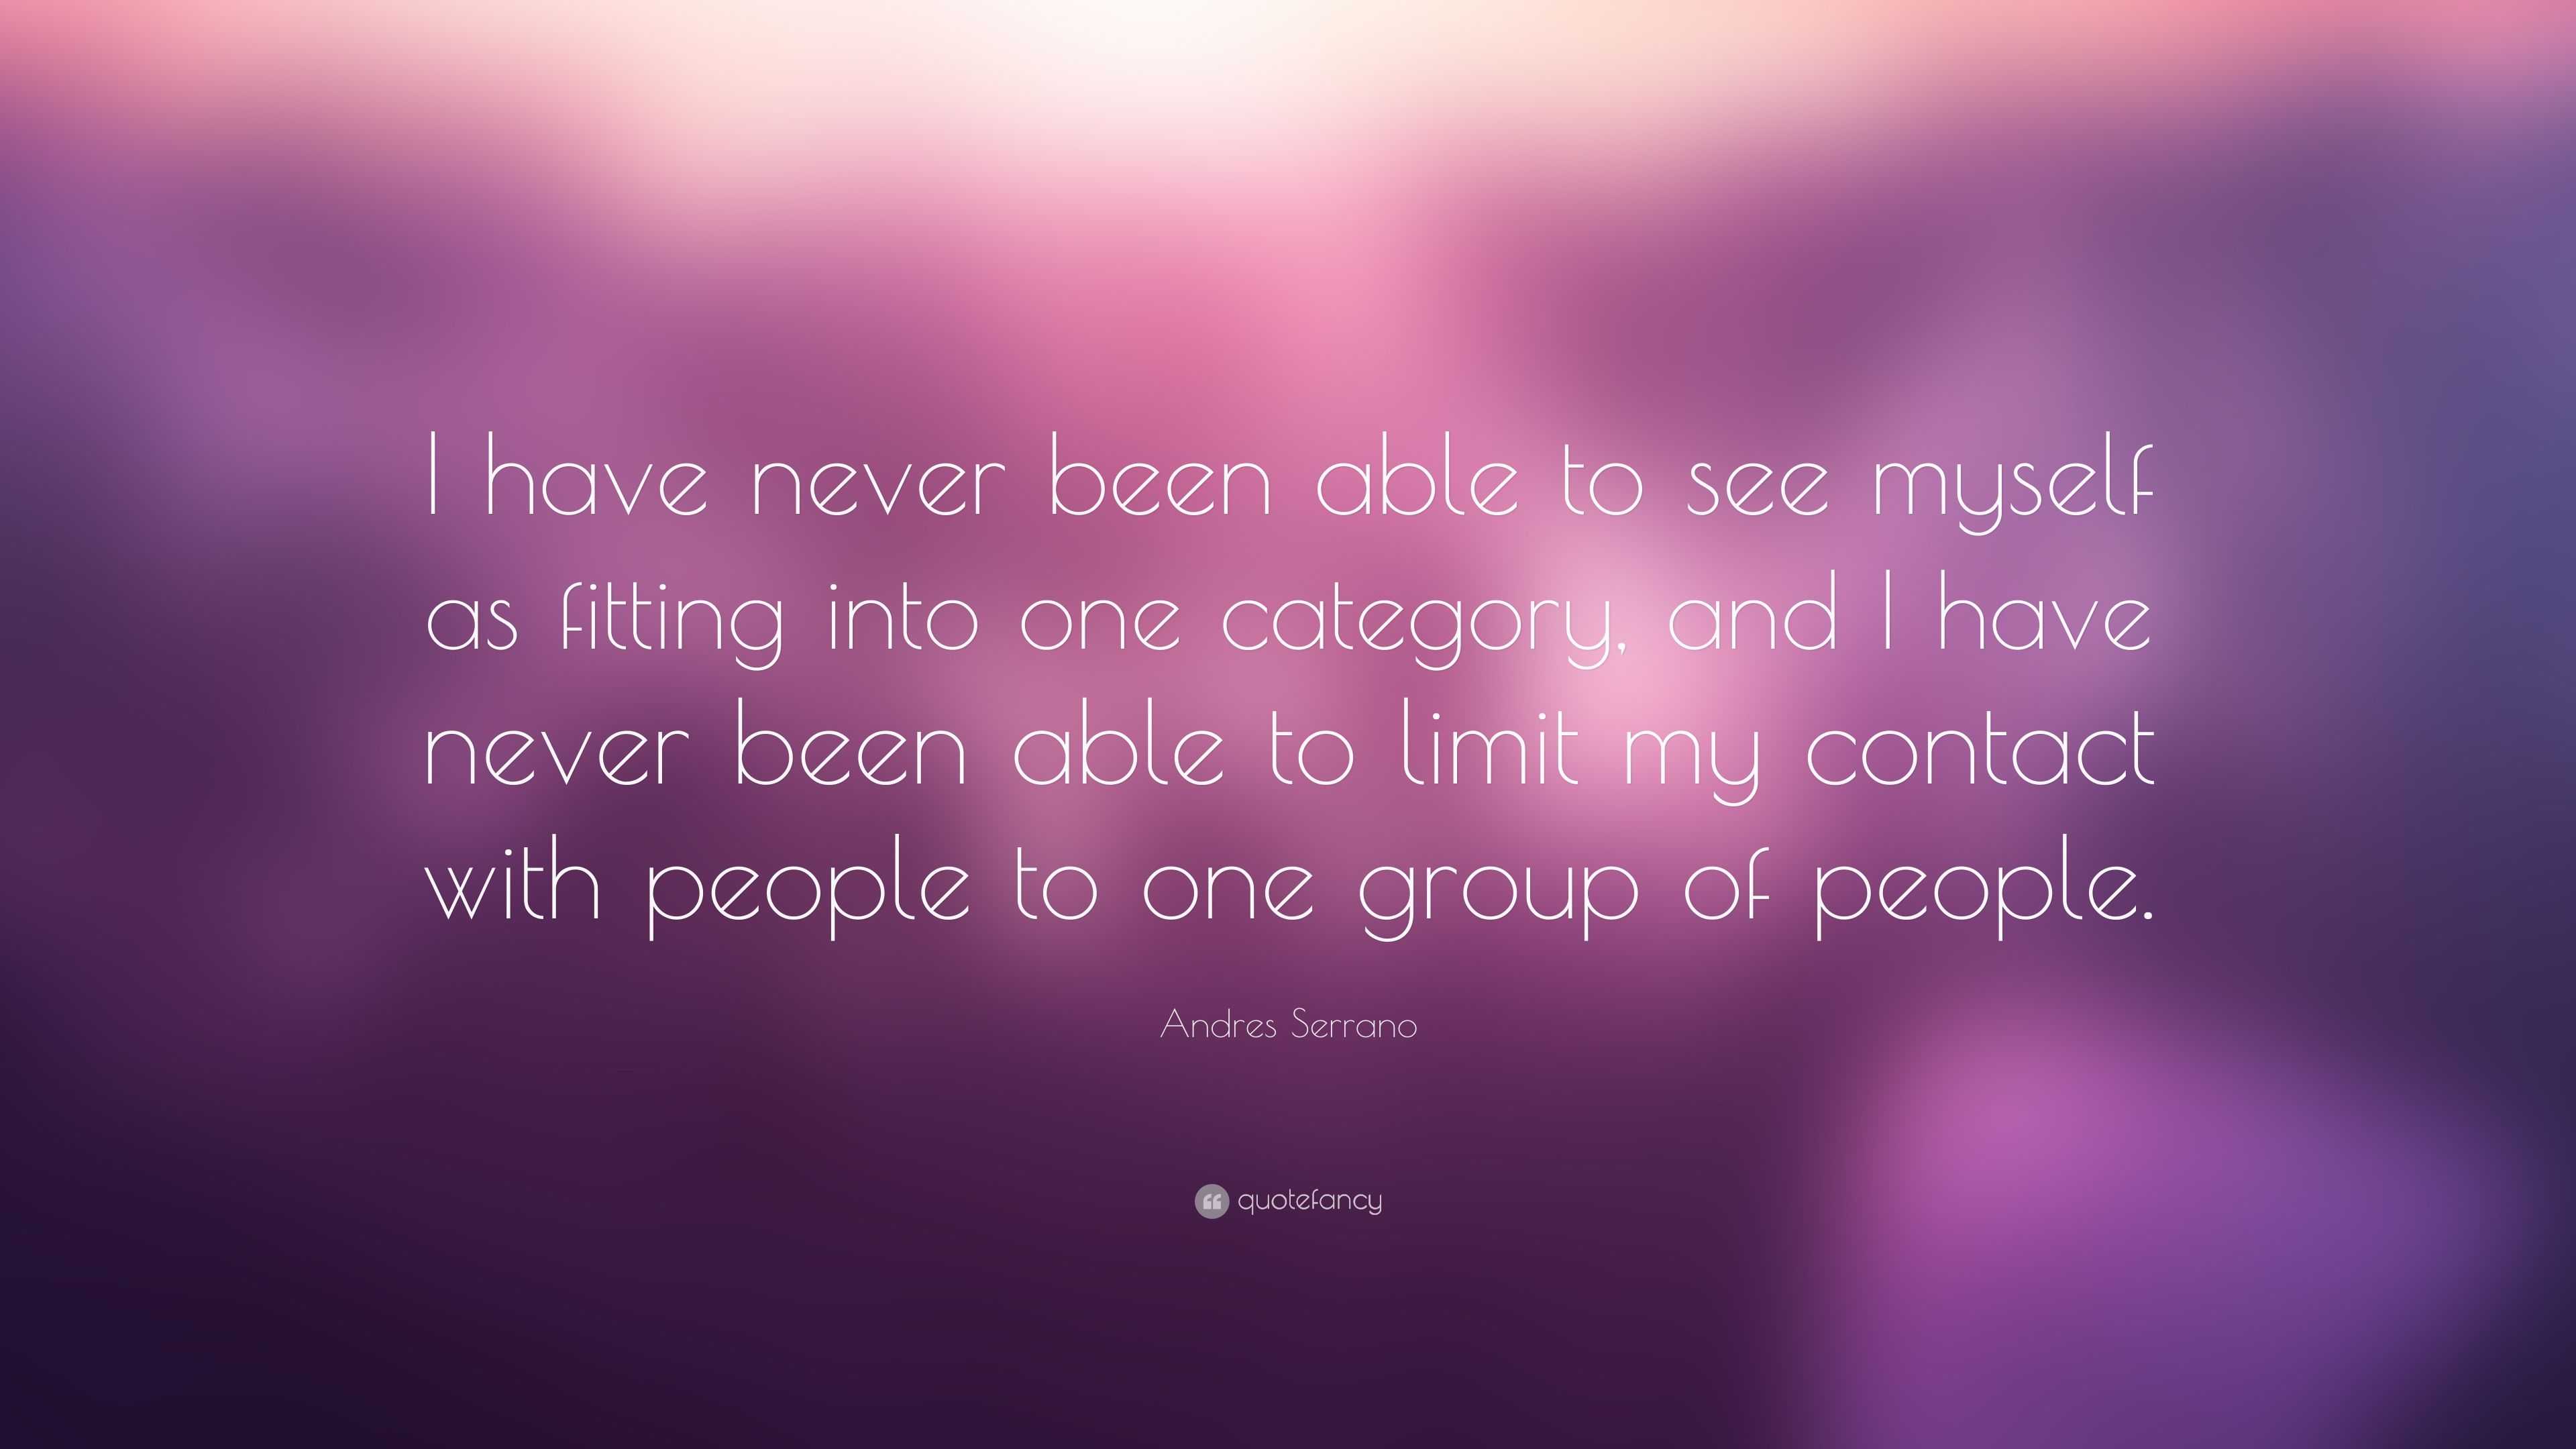 Andres Serrano Quote: “I have never been able to see myself as fitting ...